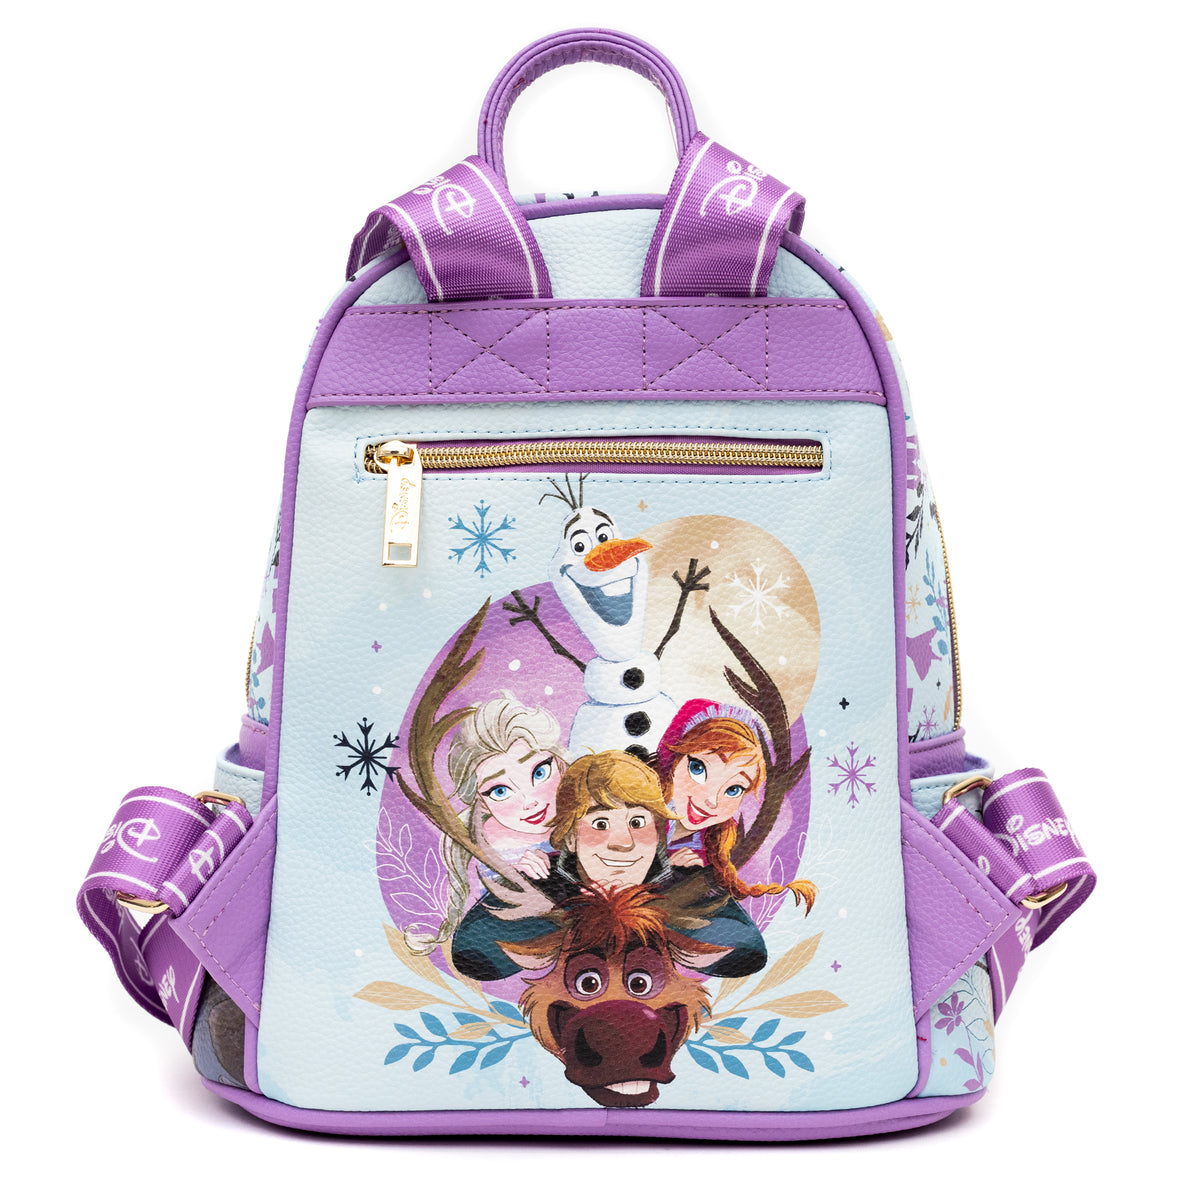 Disney Frozen Mini Backpack - Limited Edition